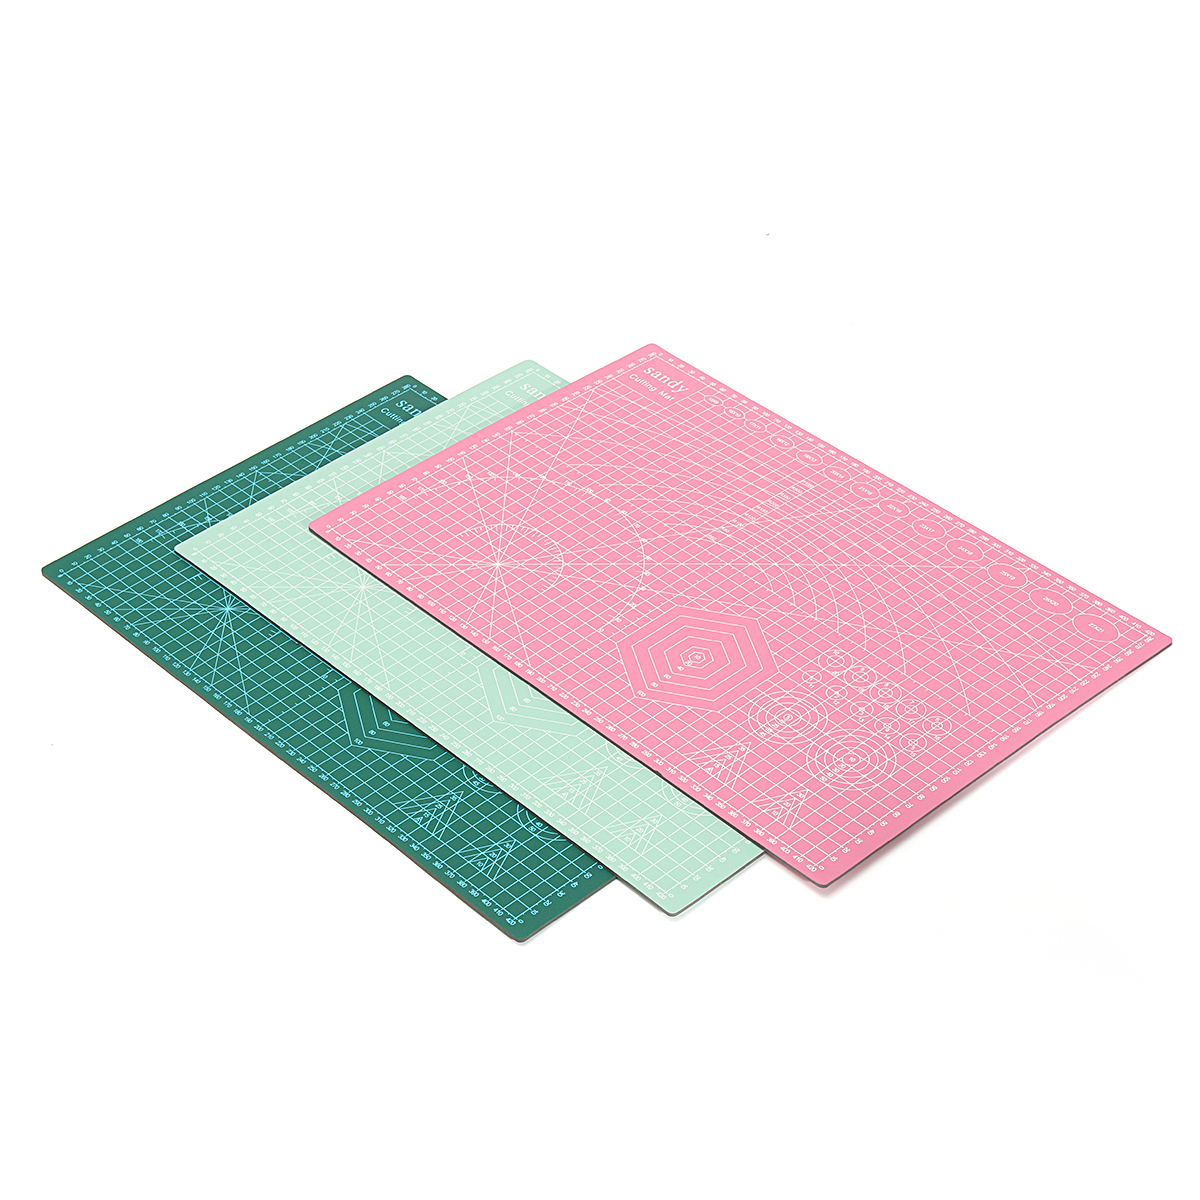 Suleve?„? CM01 A3 PVC Cutting Mat Eco Self Healing Colorful for Craft DIY 450x300x2.5mm 1